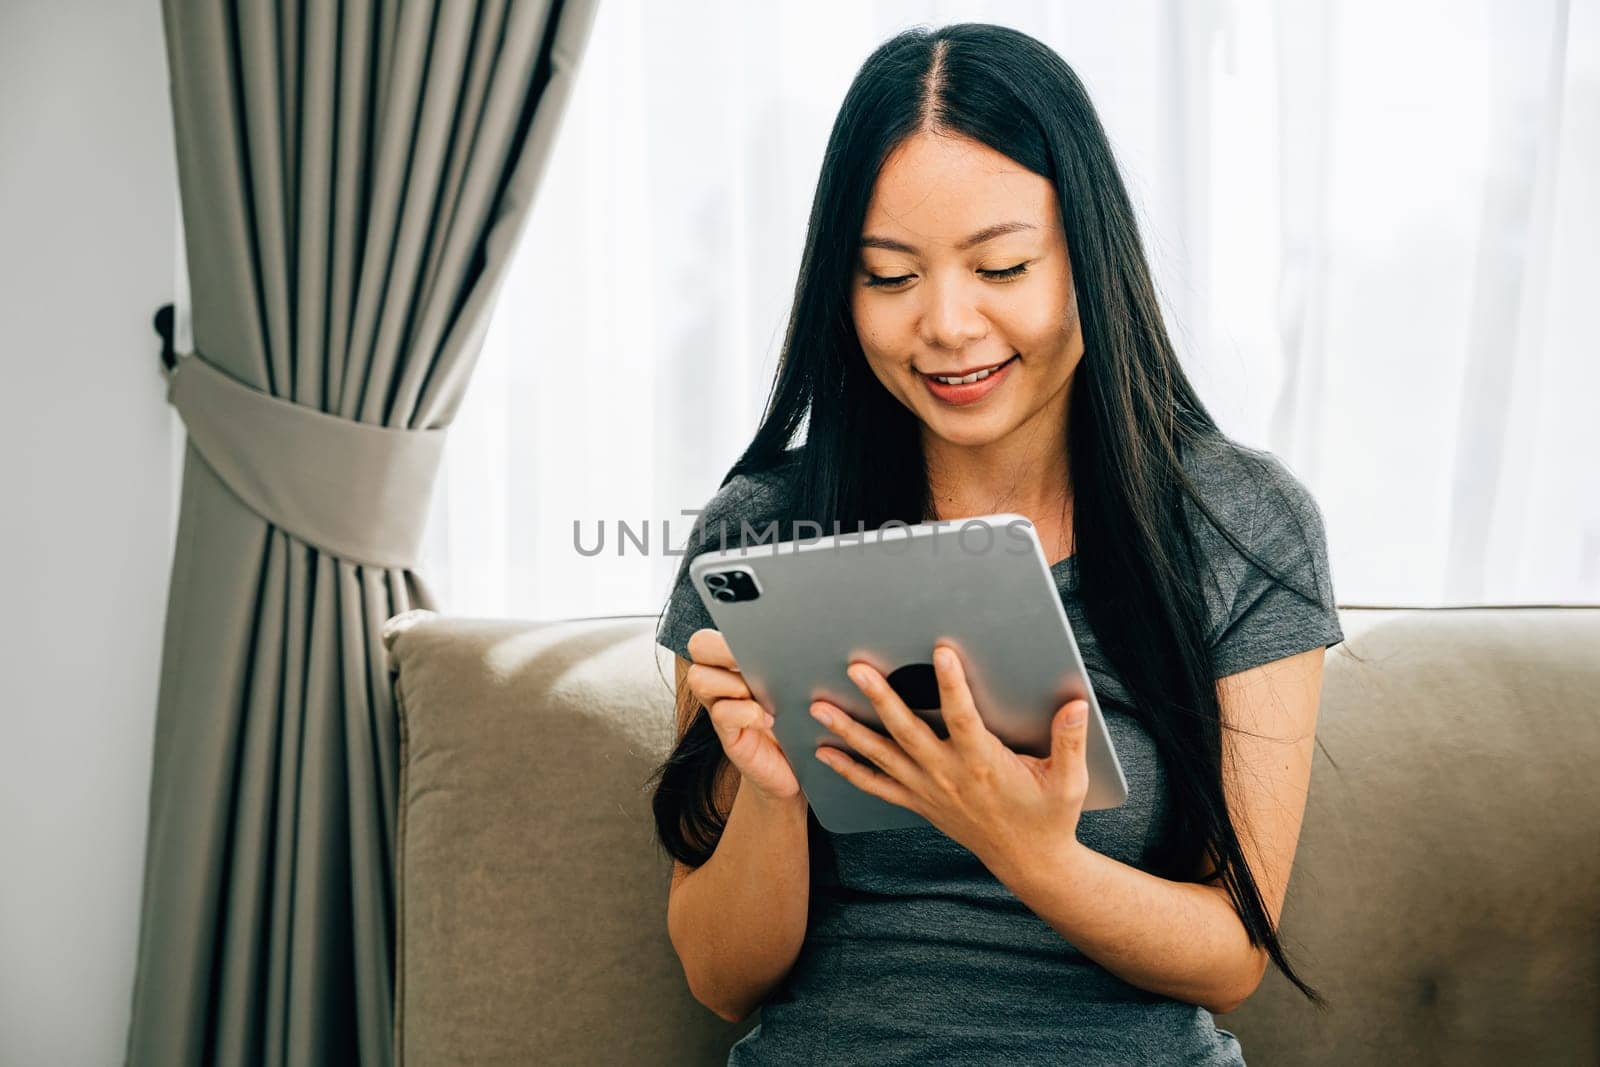 Asian woman indulges in leisurely online shopping on a digital tablet by Sorapop